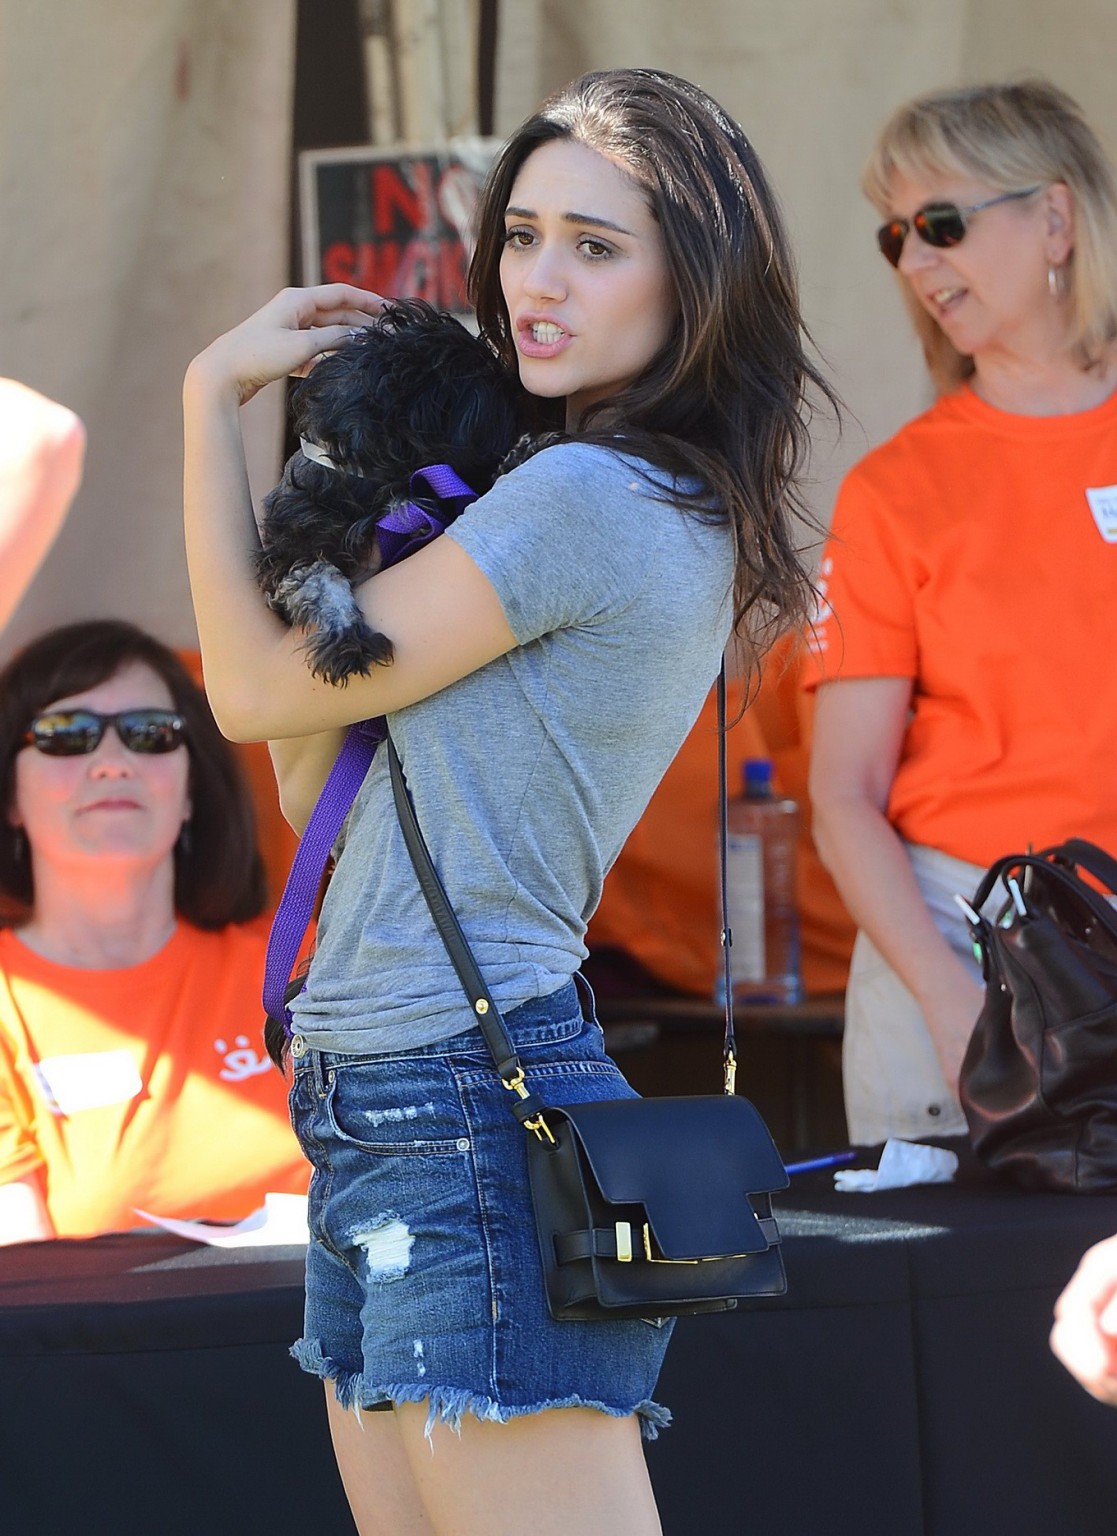 Emmy Rossum busty and leggy wearing denim shorts and top at the NKLA Adoption Ev #75181153